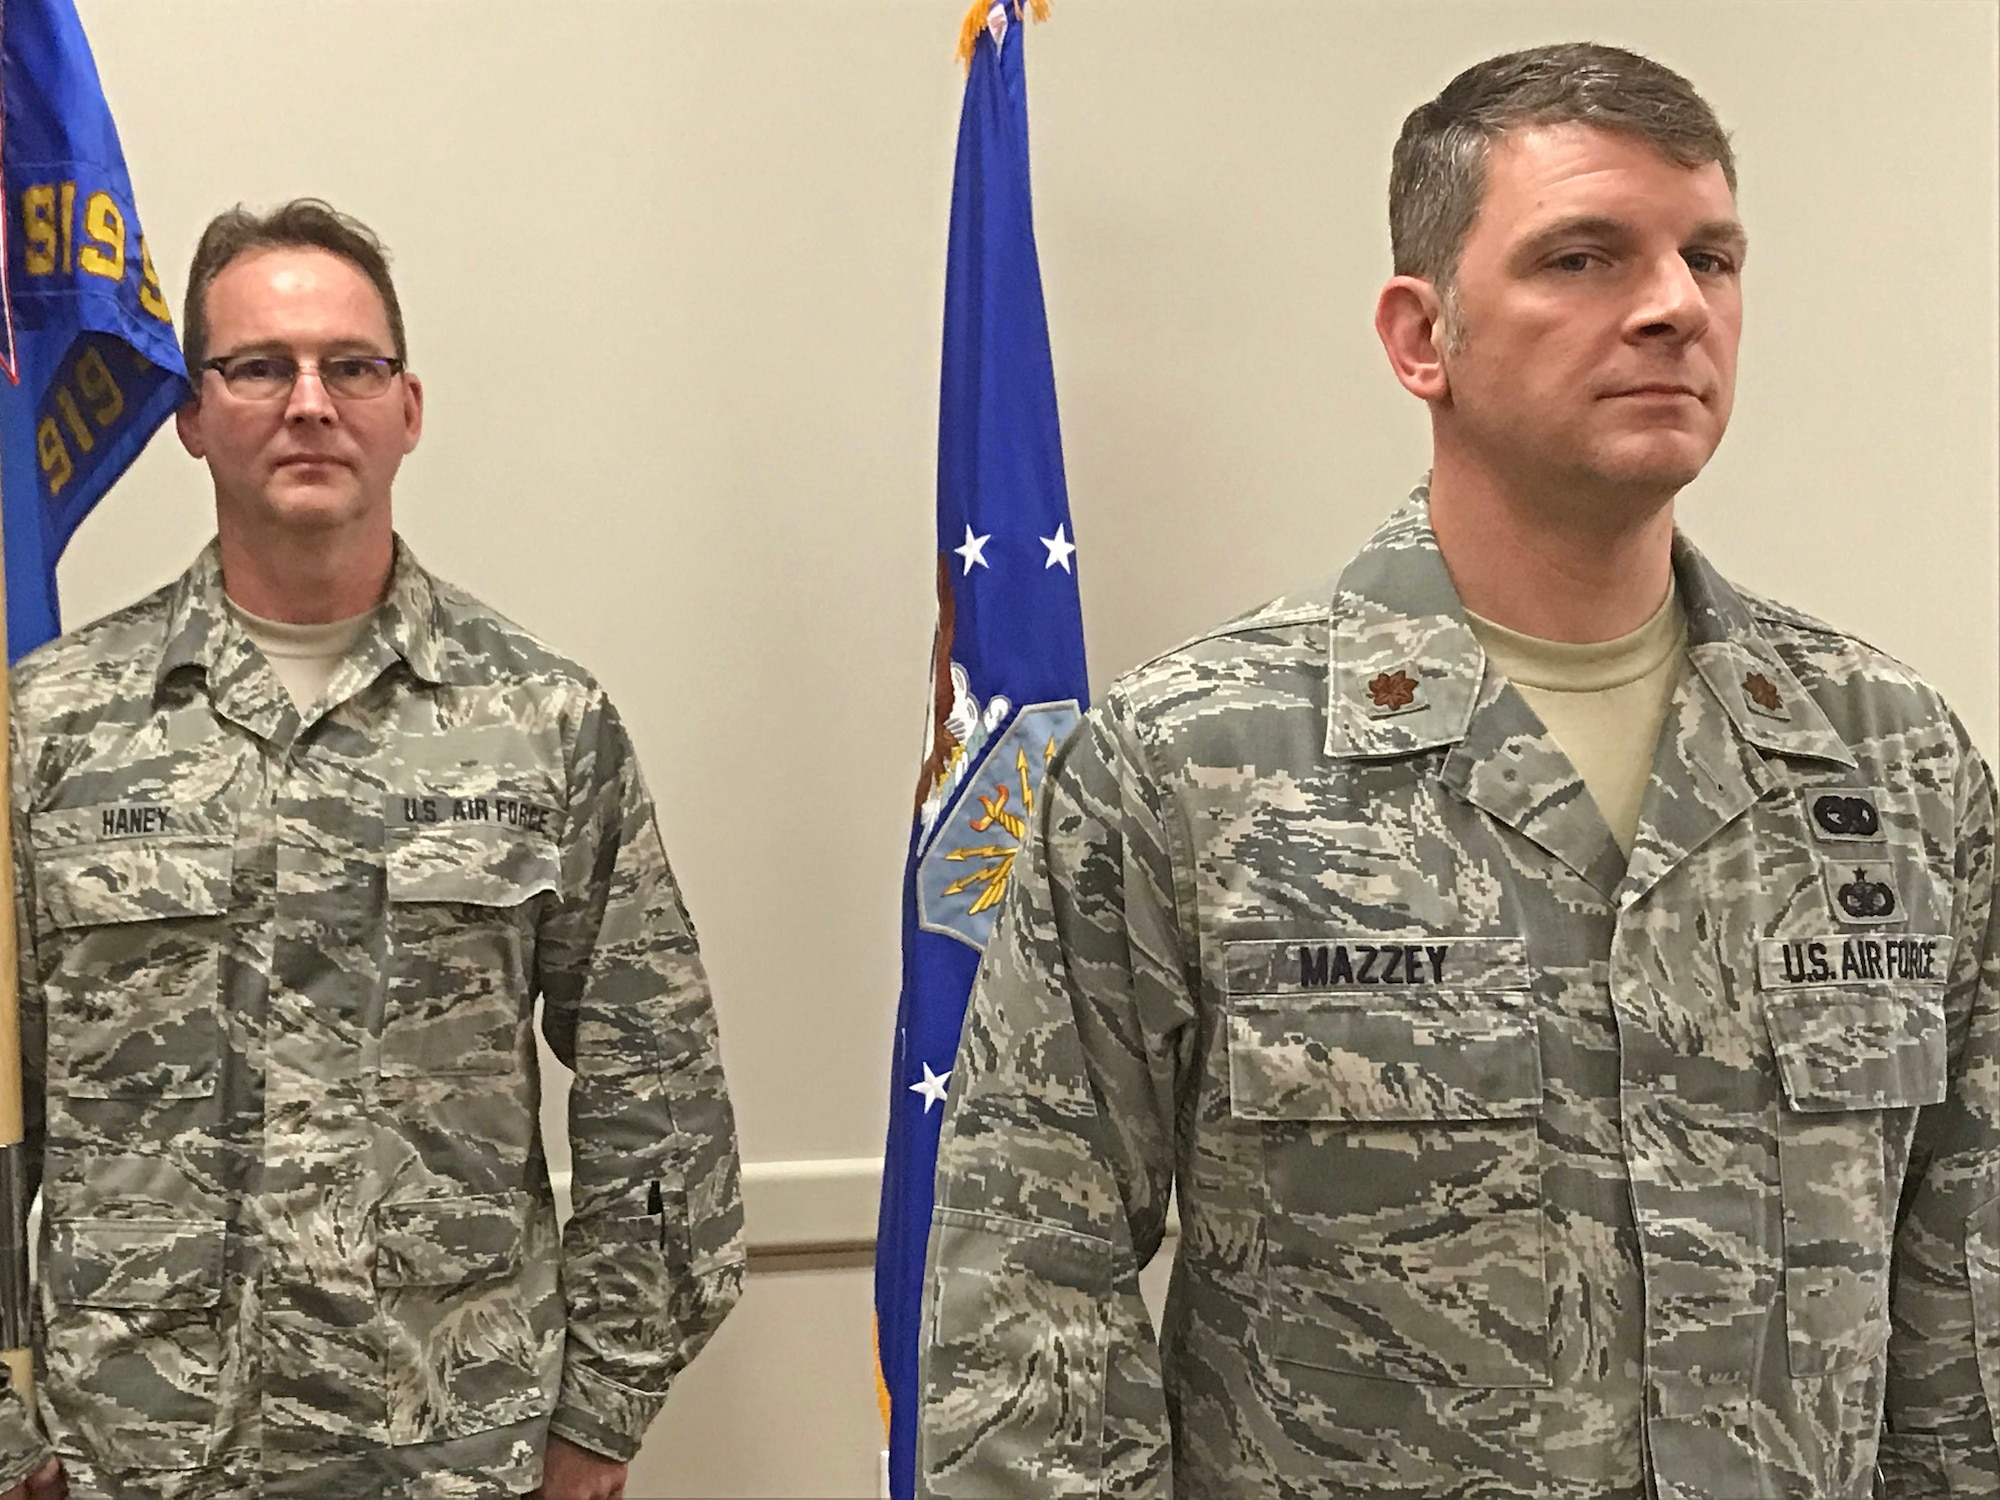 Maj. Chris Mazzey stands at attention as he is formally introduced as the new commander of the 919th Special Operations Logistics Readiness Squadron